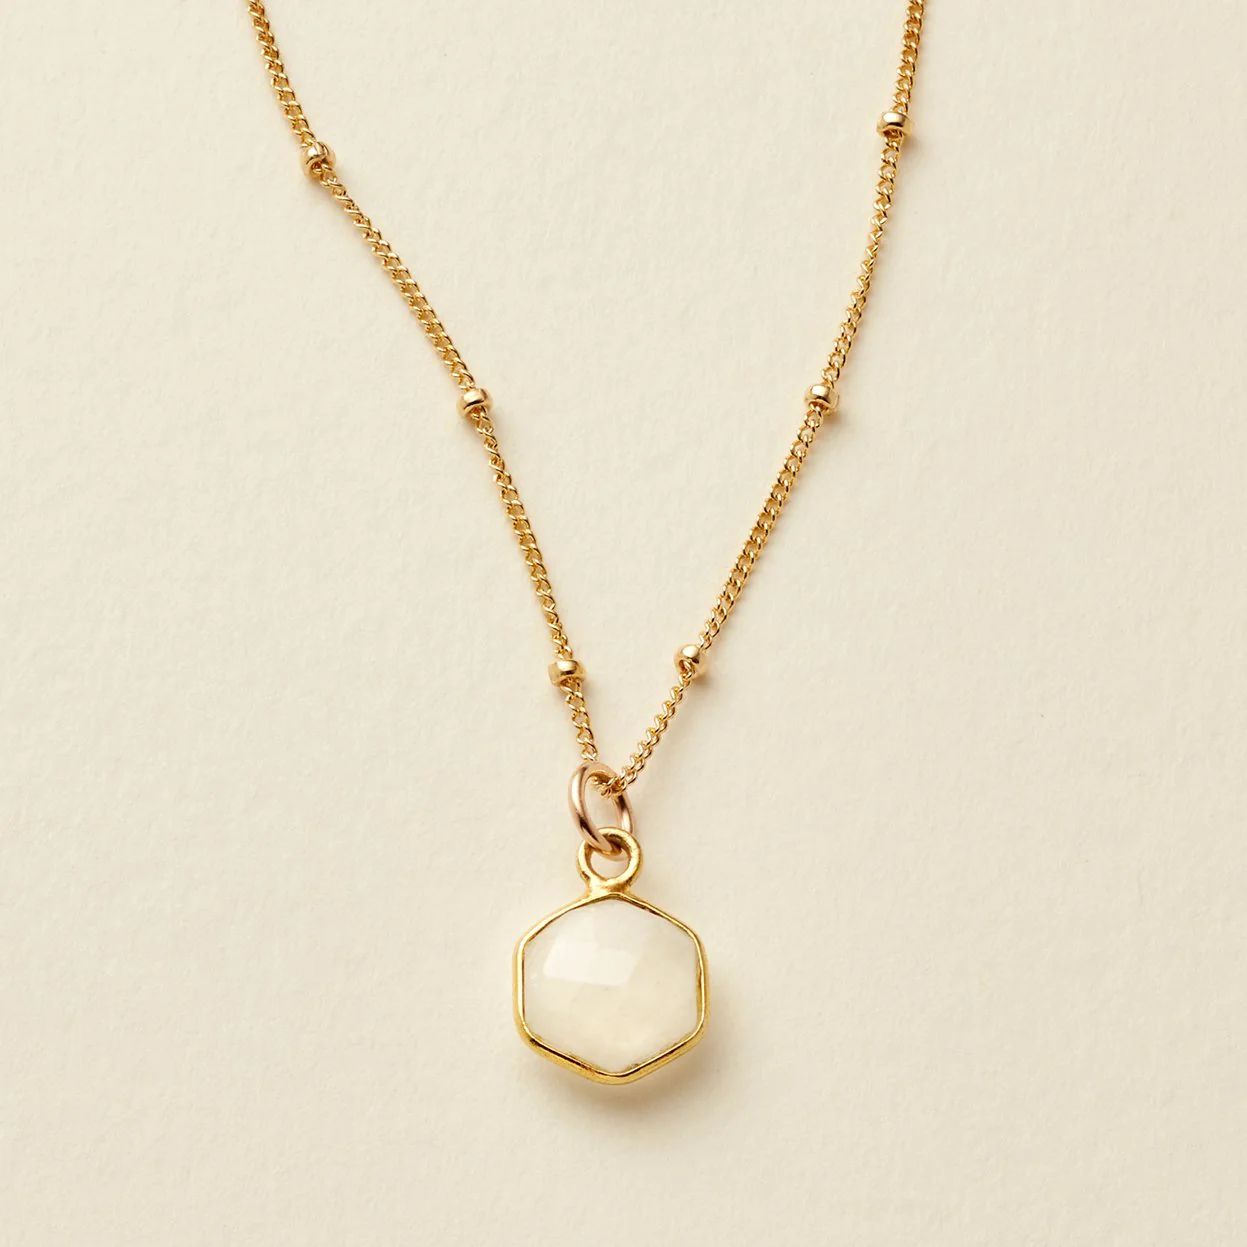 Moonstone Necklace | Made by Mary (US)